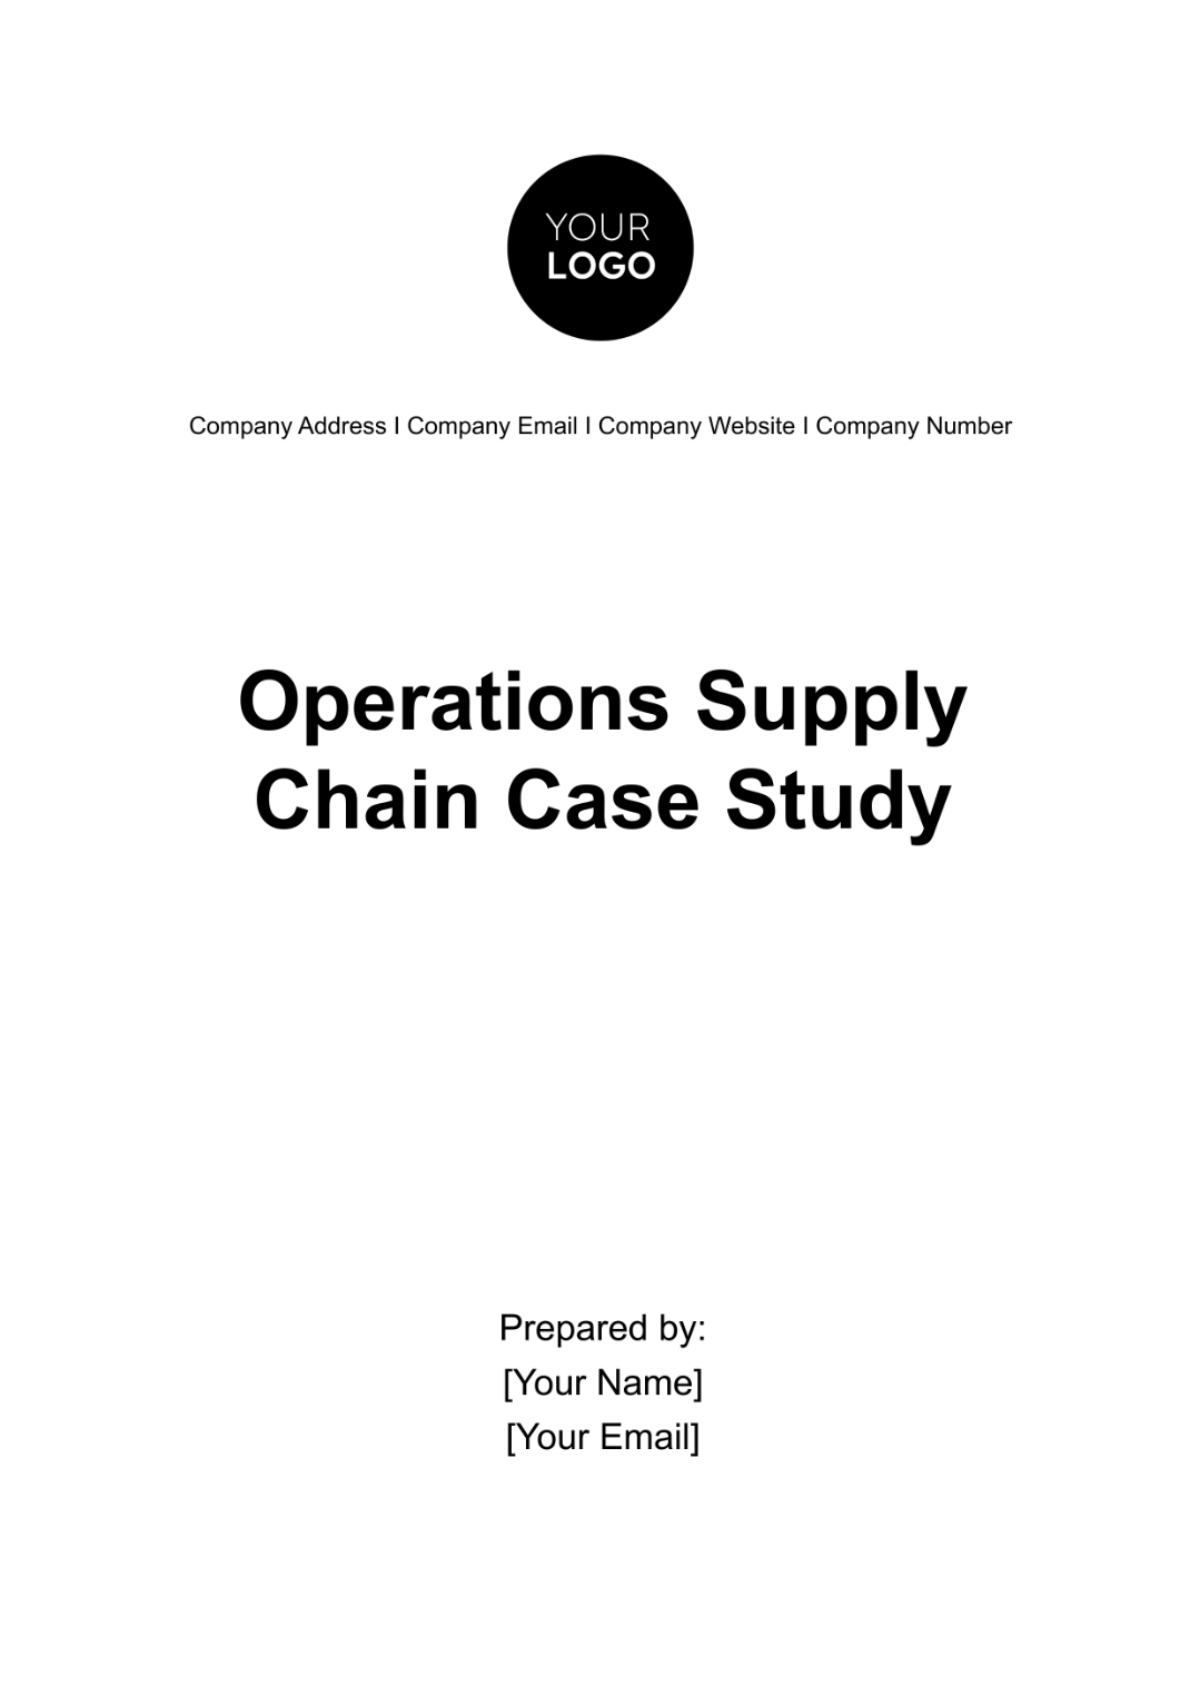 Operations Supply Chain Case Study Template